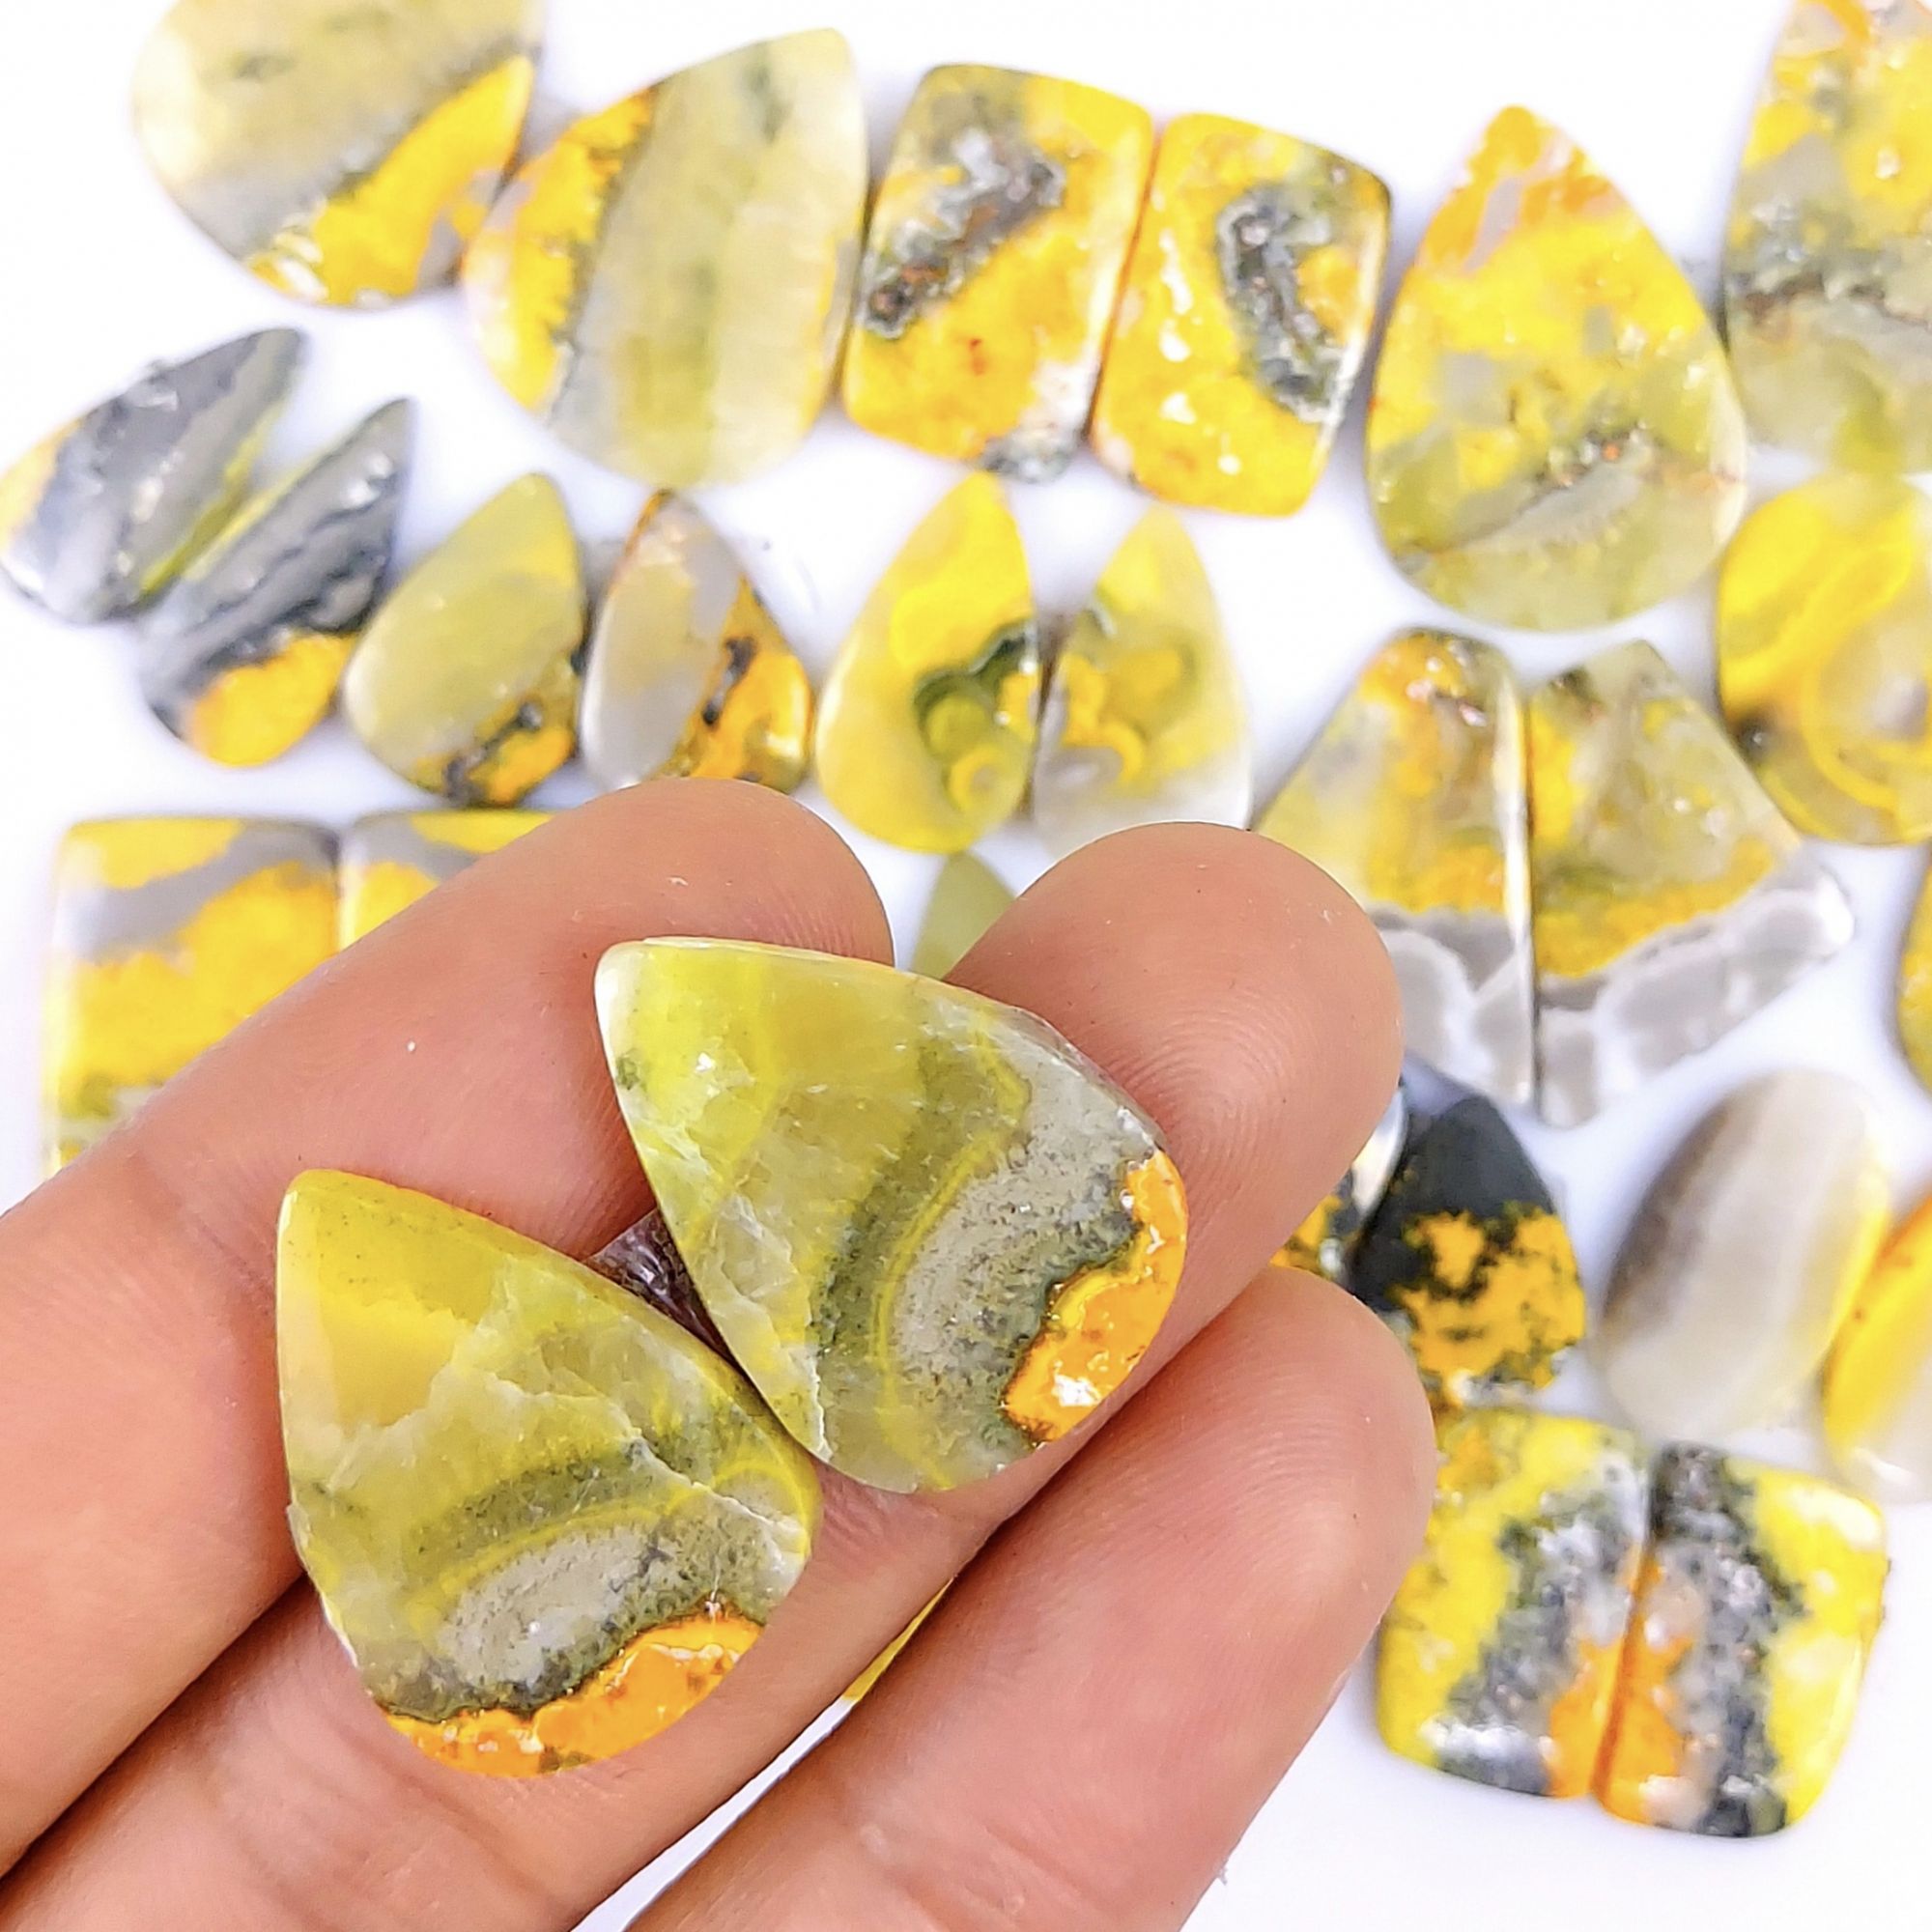 16 Pair Lot 312Cts Natural Bumble Bee Jasper Yellow Sterling Pendant Handmade Jewelry Pendant Natural Gemstone Pendant Gift For Mom 27x22 17x14mm#5683